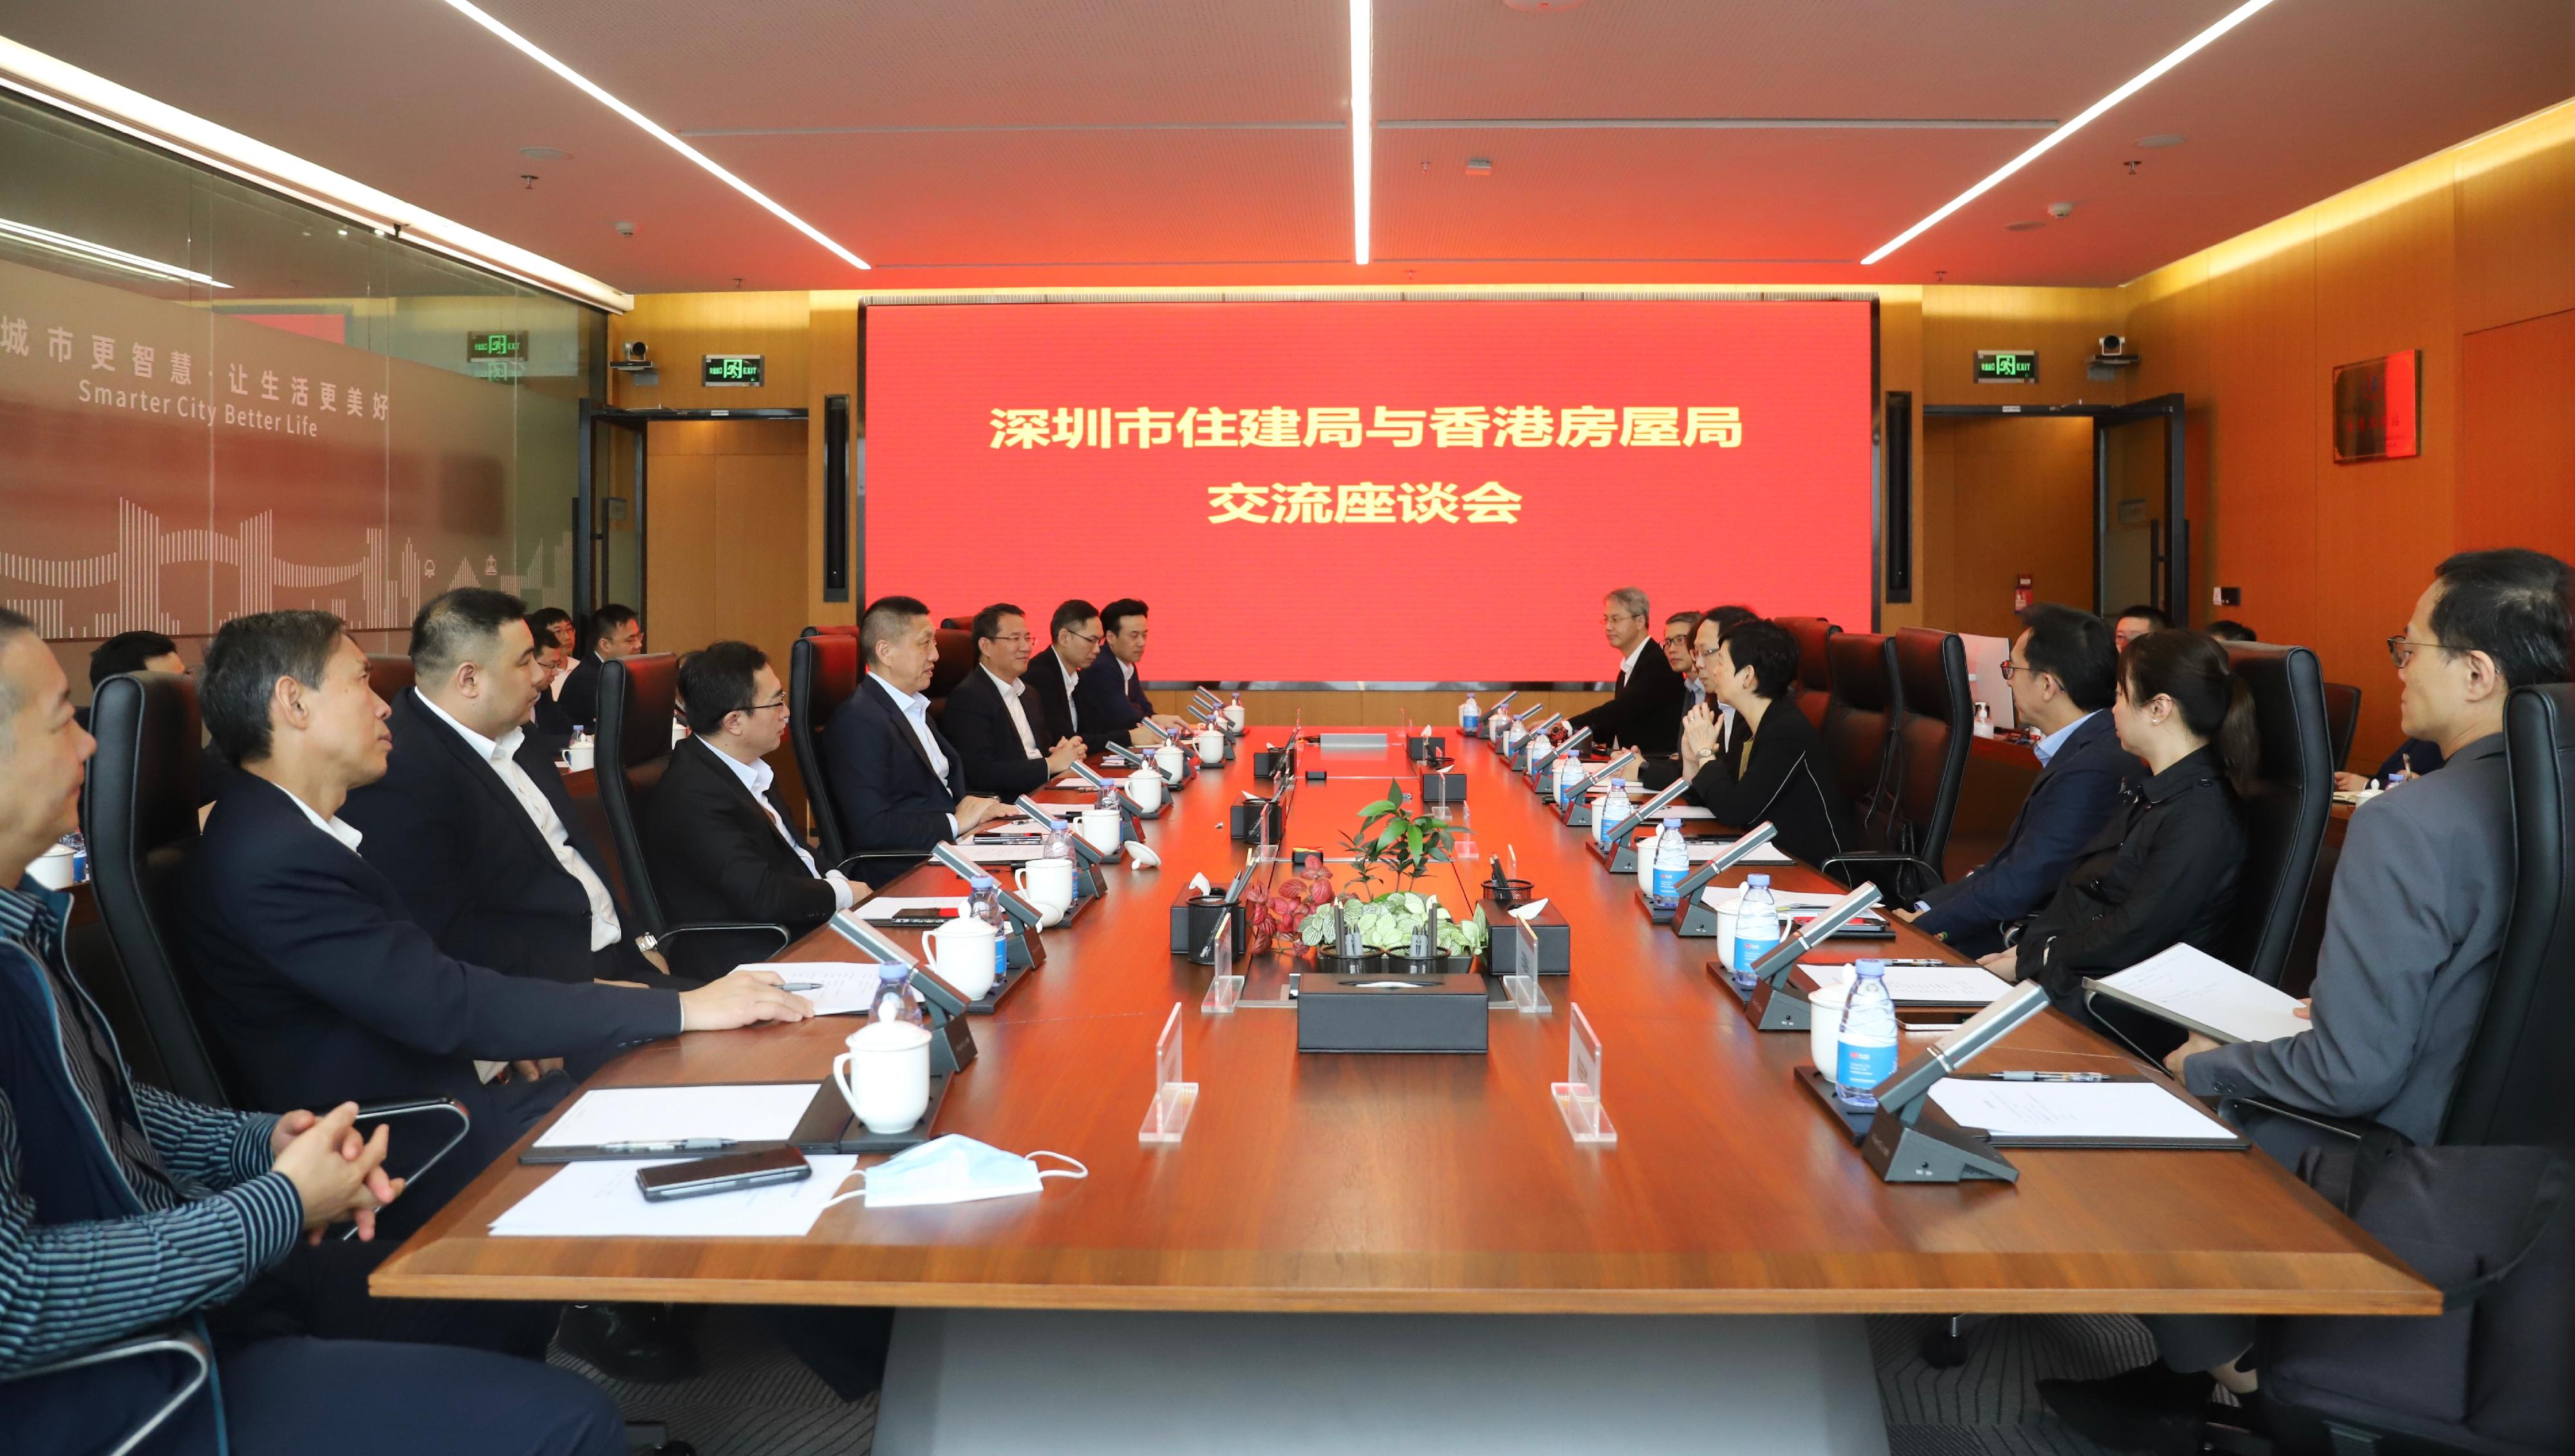 The Secretary for Housing, Ms Winnie Ho, led representatives of the Housing Bureau, the Housing Department and the Architectural Services Department to Shenzhen today (April 3). Photo shows Ms Ho (fourth right) participating in a seminar organised by the Housing and Construction Bureau of Shenzhen Municipality  (HCBSM) to exchange views with the Party Secretary and Director-General of the HCBSM, Mr Xu Songming (fifth left), and relevant officials on construction technologies and urban planning and development.
